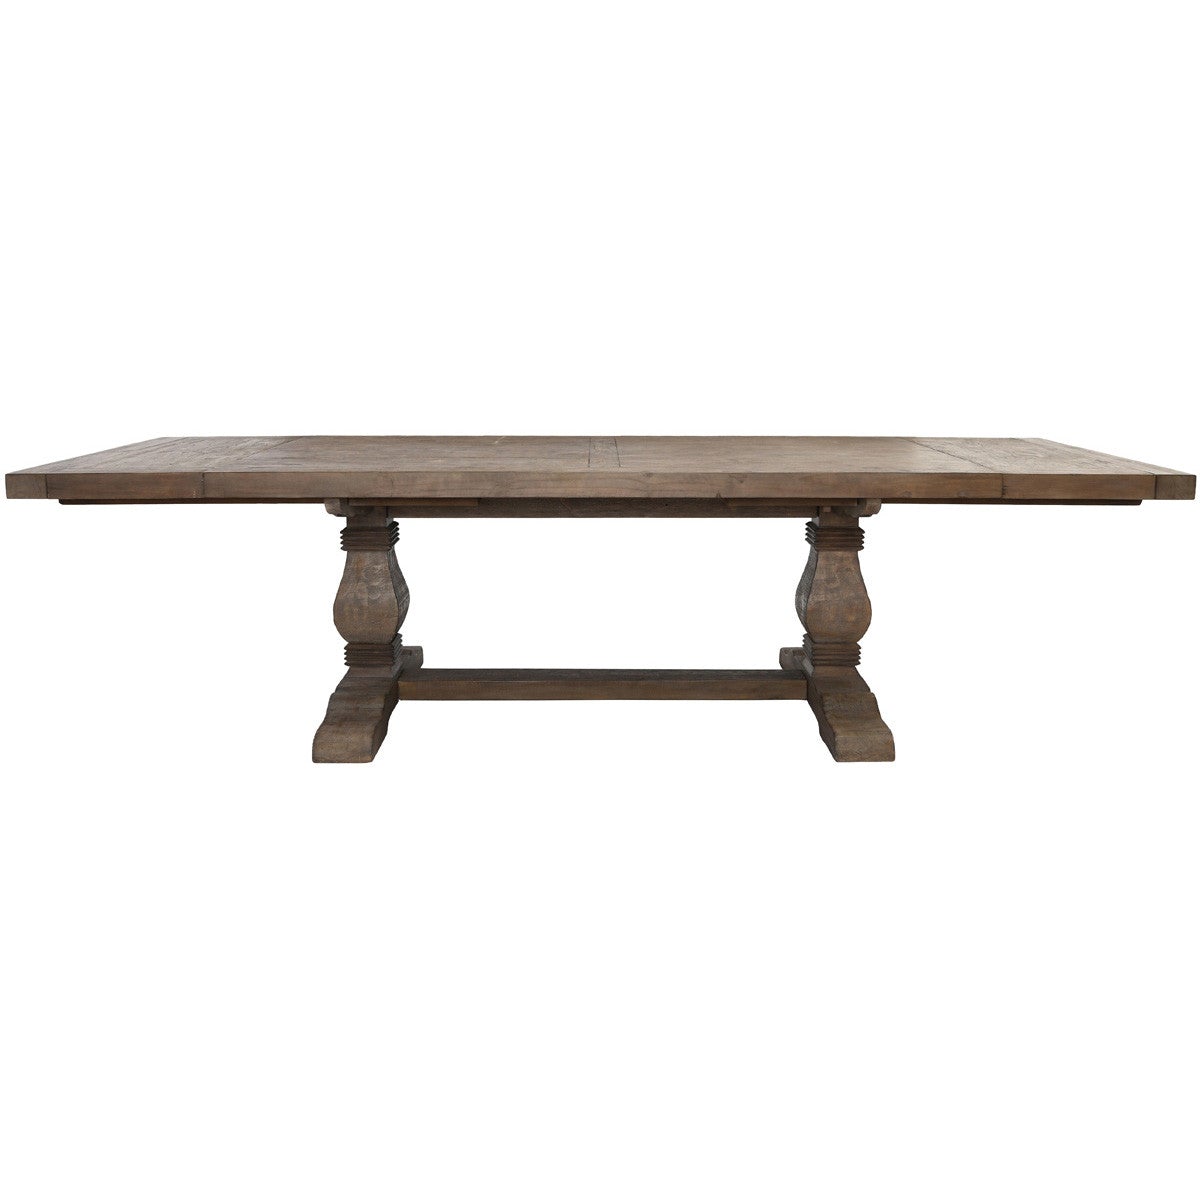 Caleb Extension SPO Dining Table 84-114" - Rug & Home